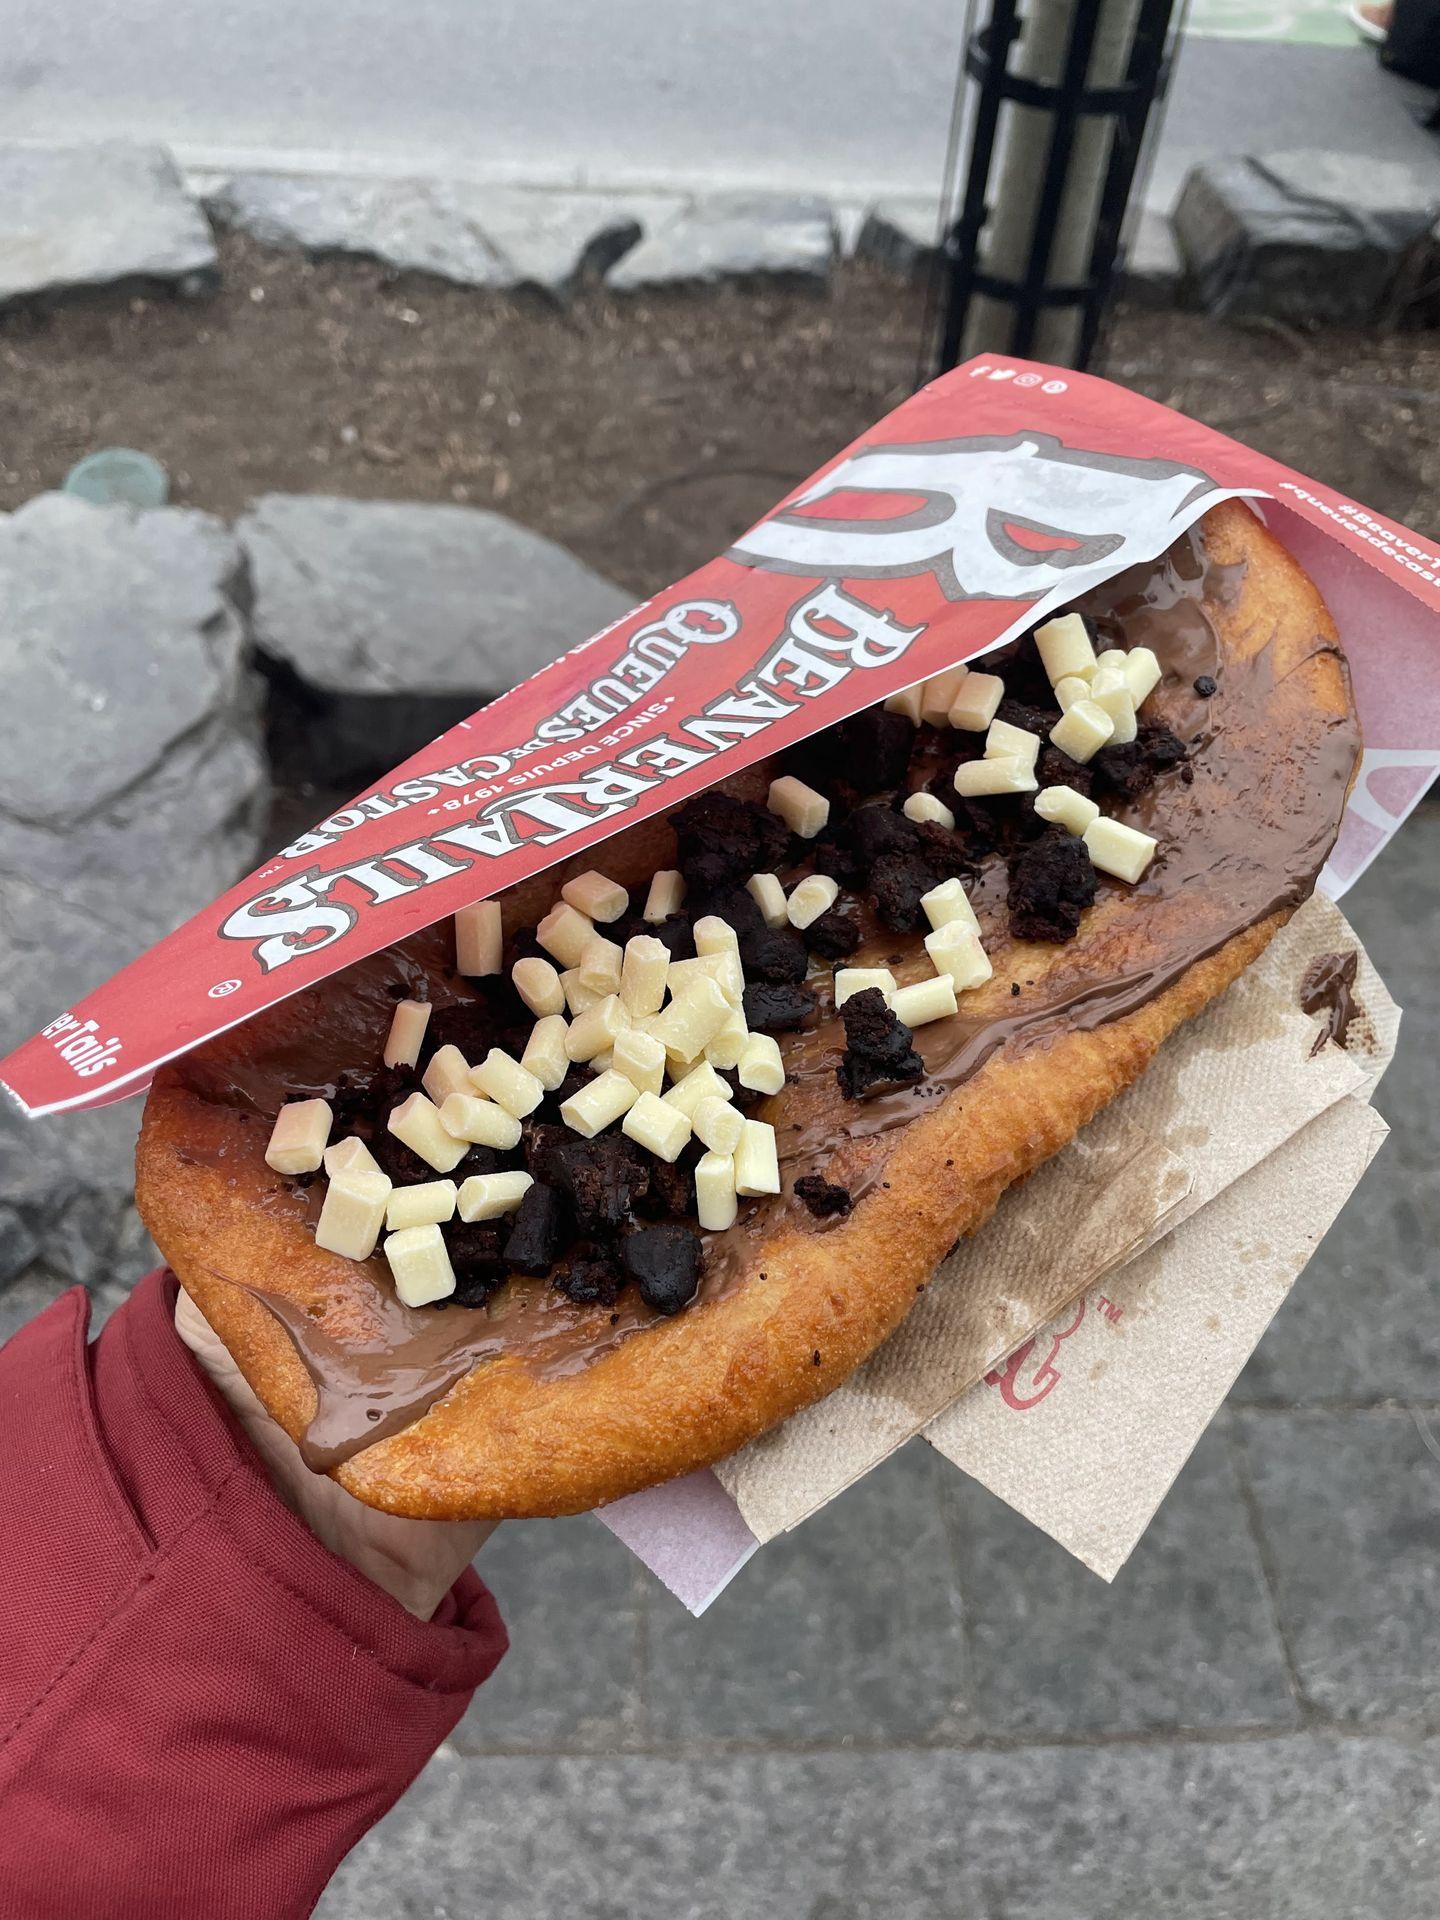 A BeaverTail pastry topped with nutella and chocolate chips.